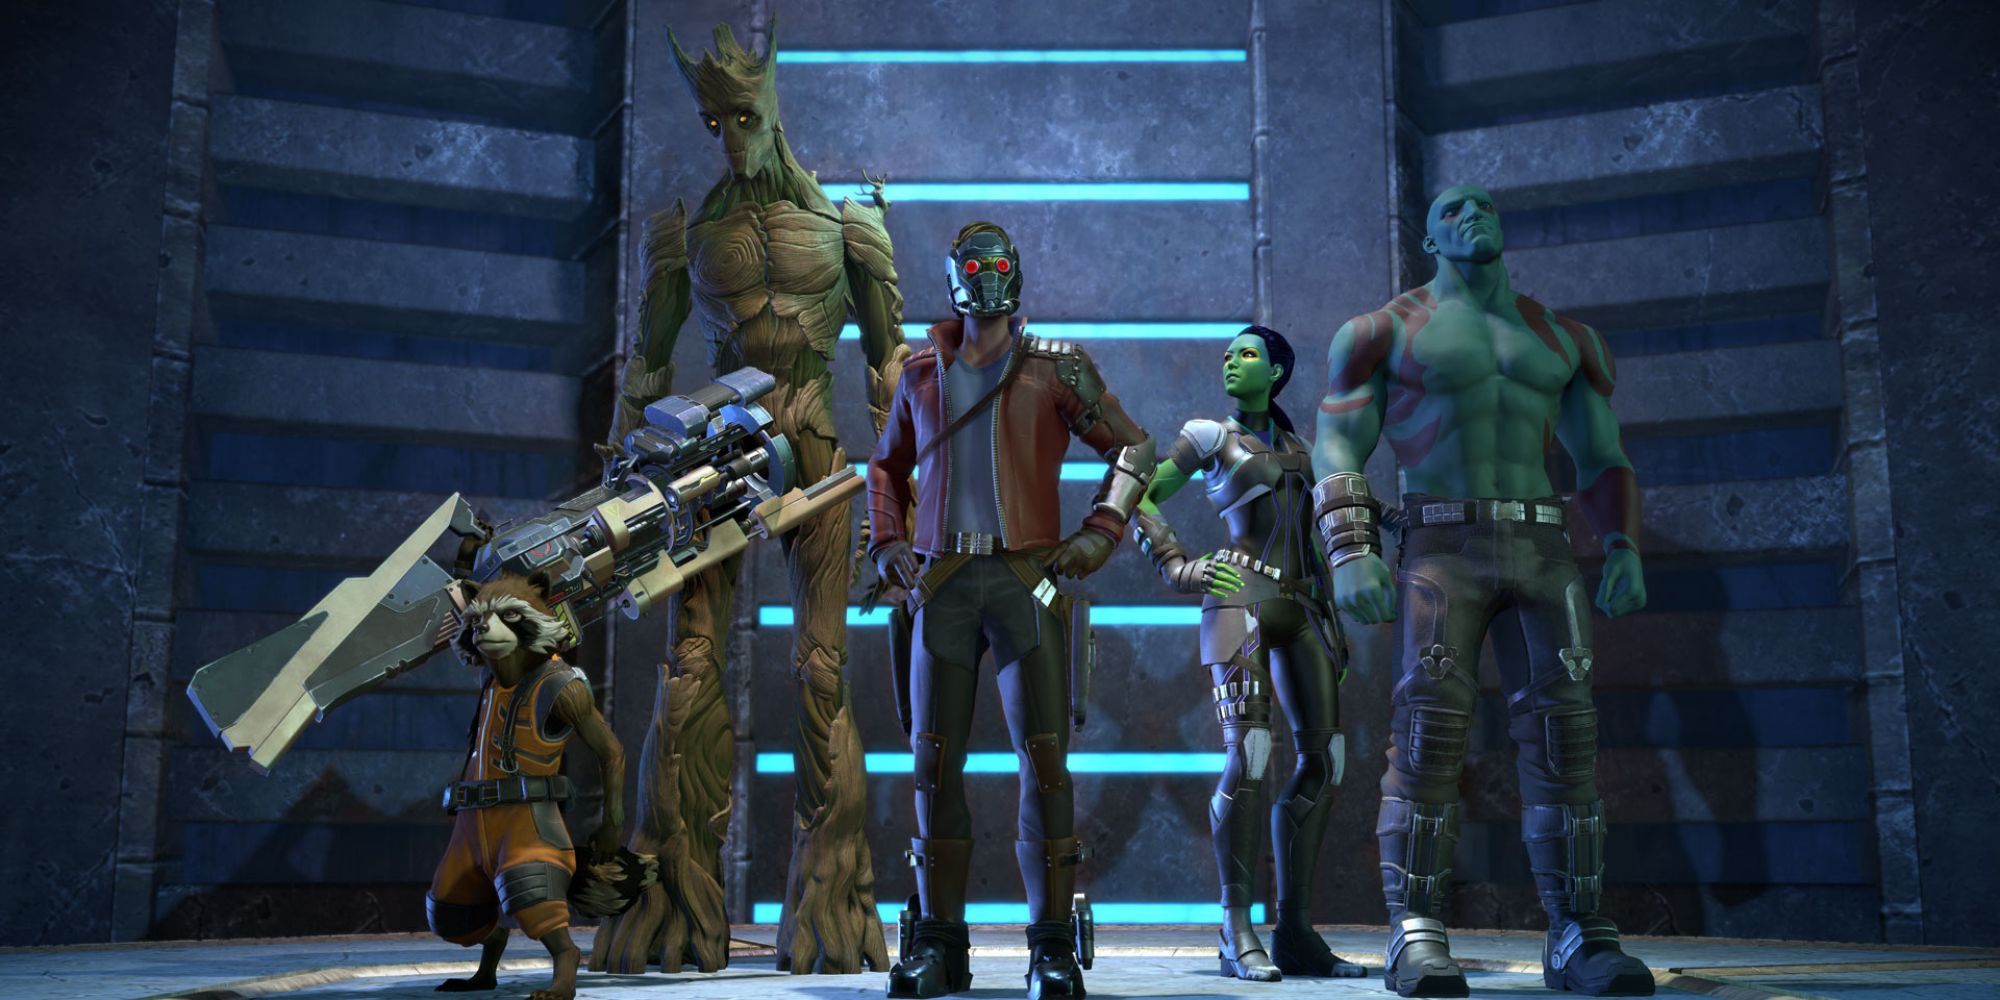 Star-Lord, Rocket, Gamora, Groot, and Drax stand on an elevator